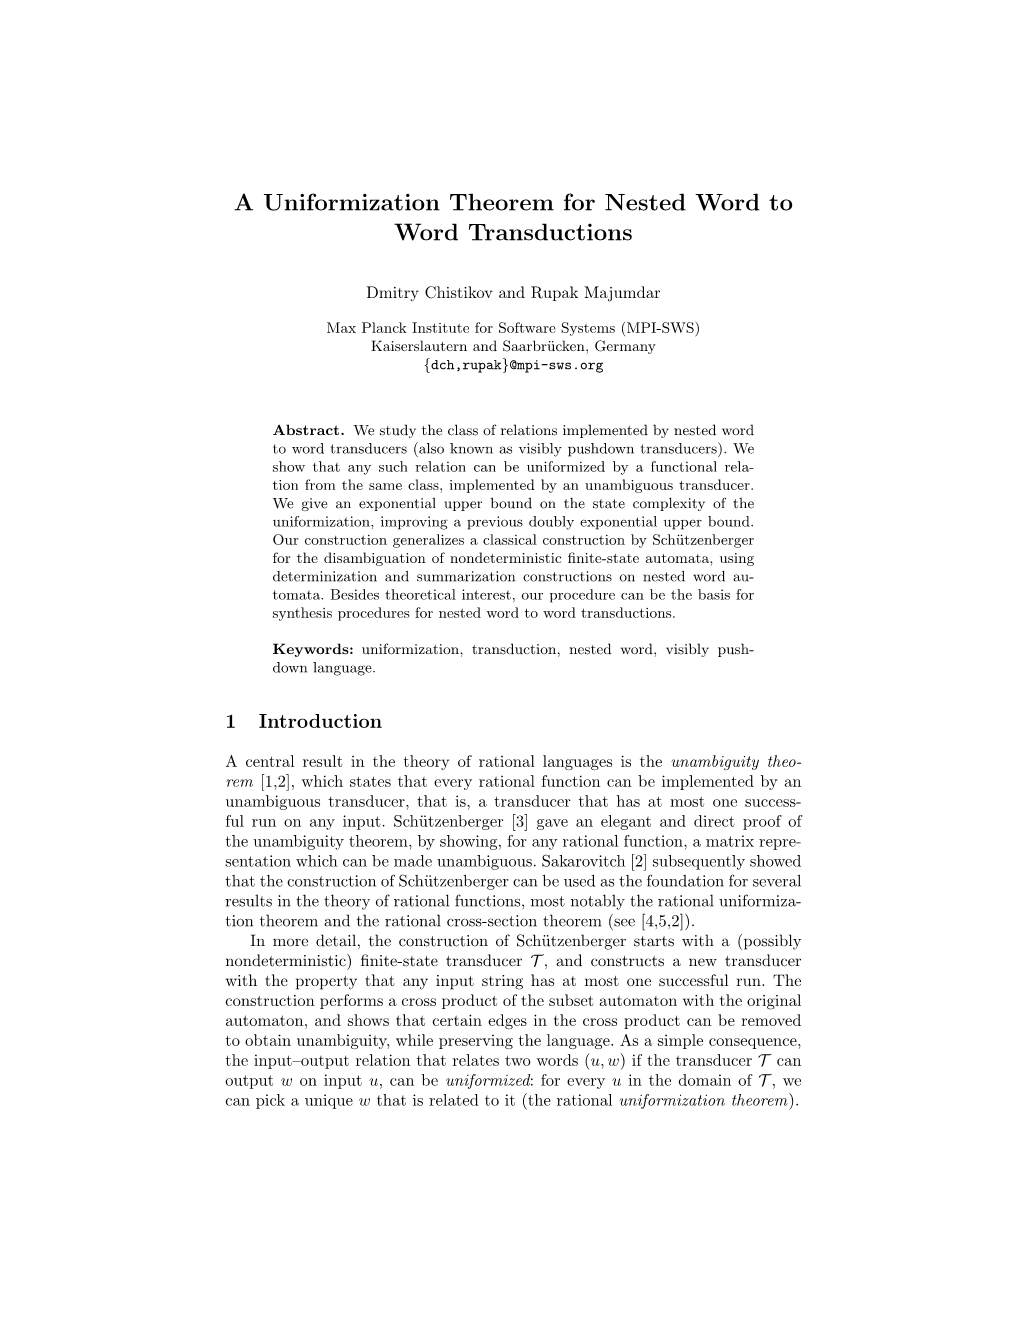 A Uniformization Theorem for Nested Word to Word Transductions